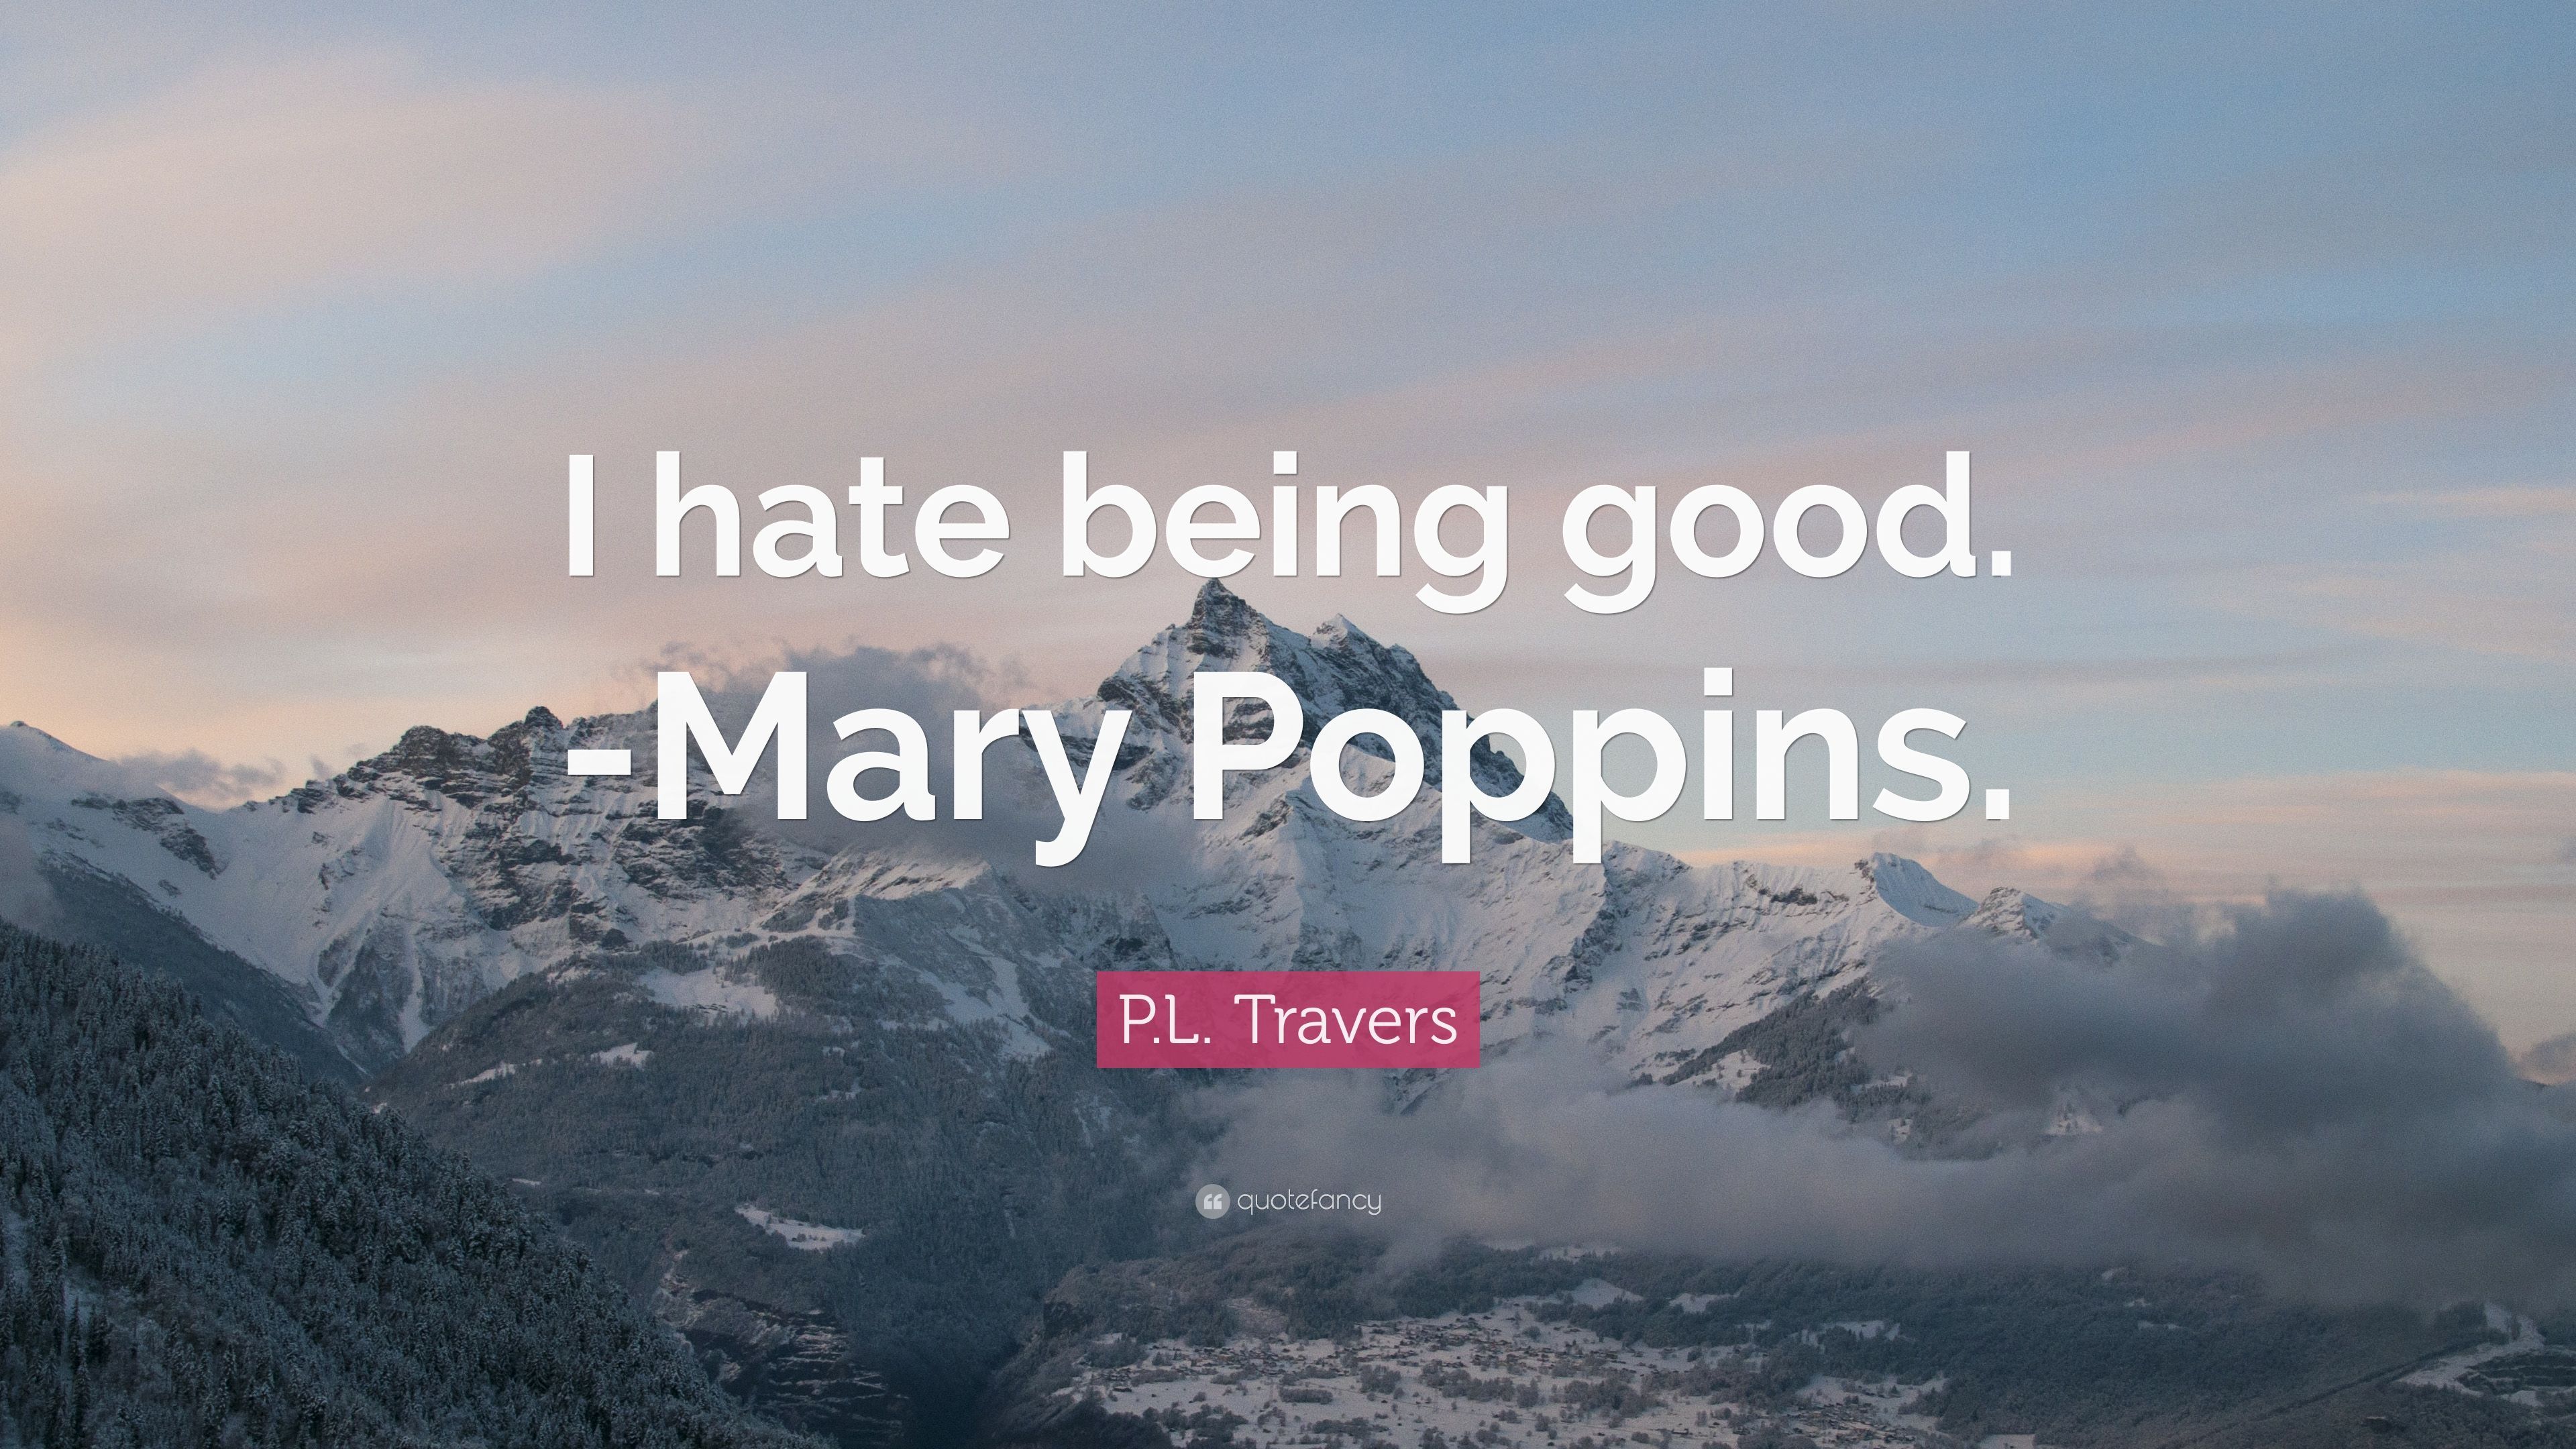 P.L. Travers Quote: “I hate being good. -Mary Poppins.” 7